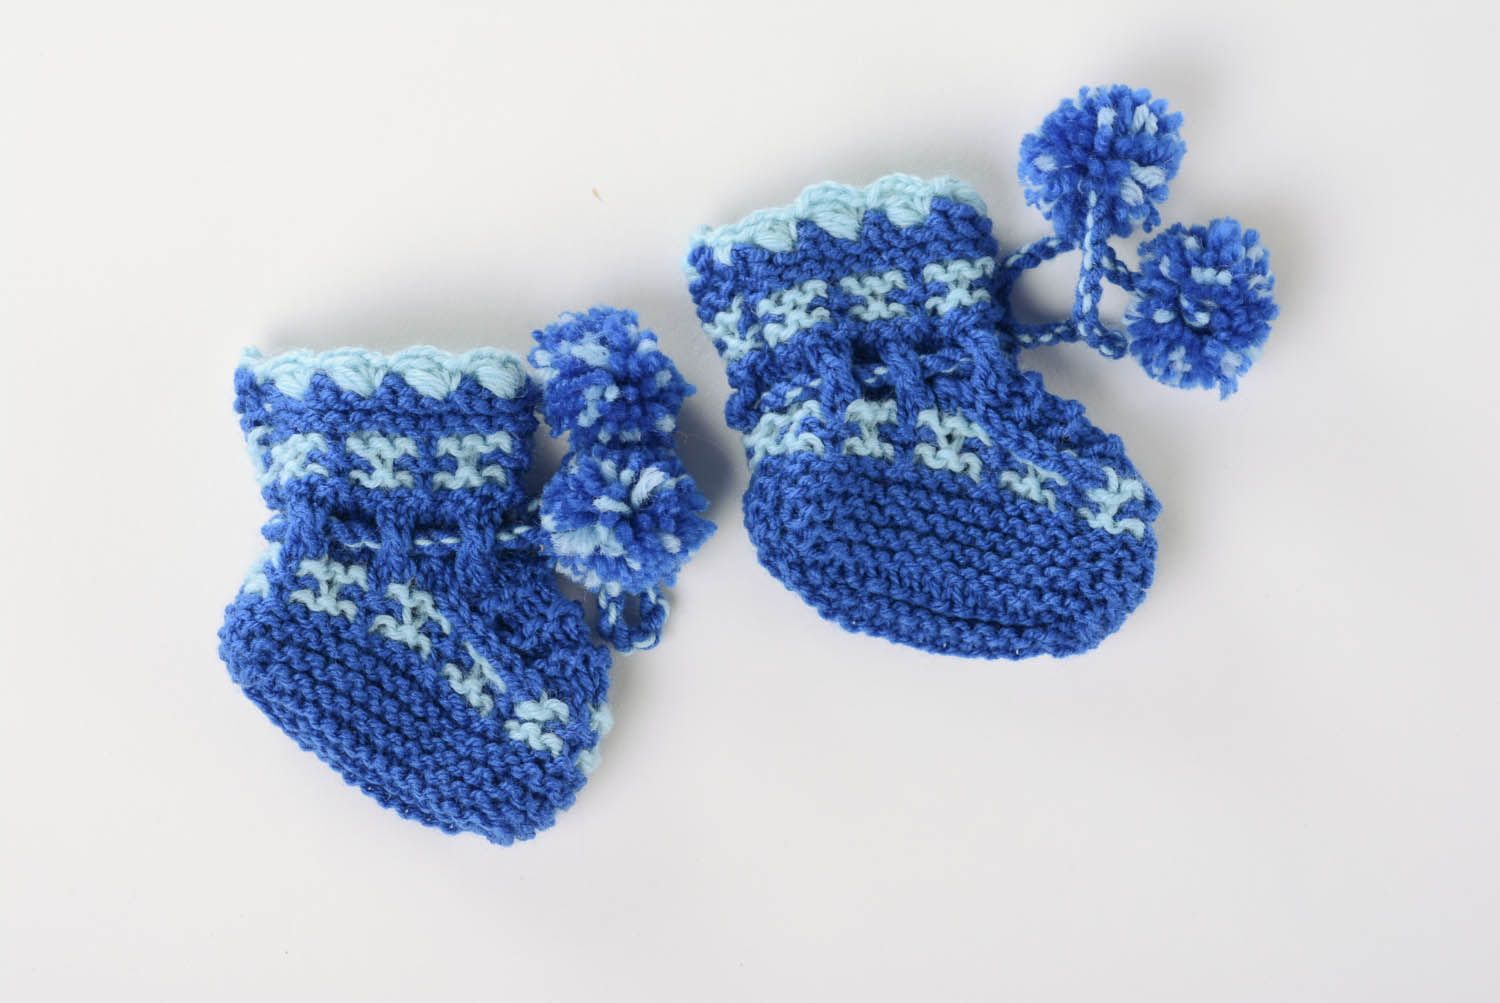 Pink crocheted baby shoes photo 3